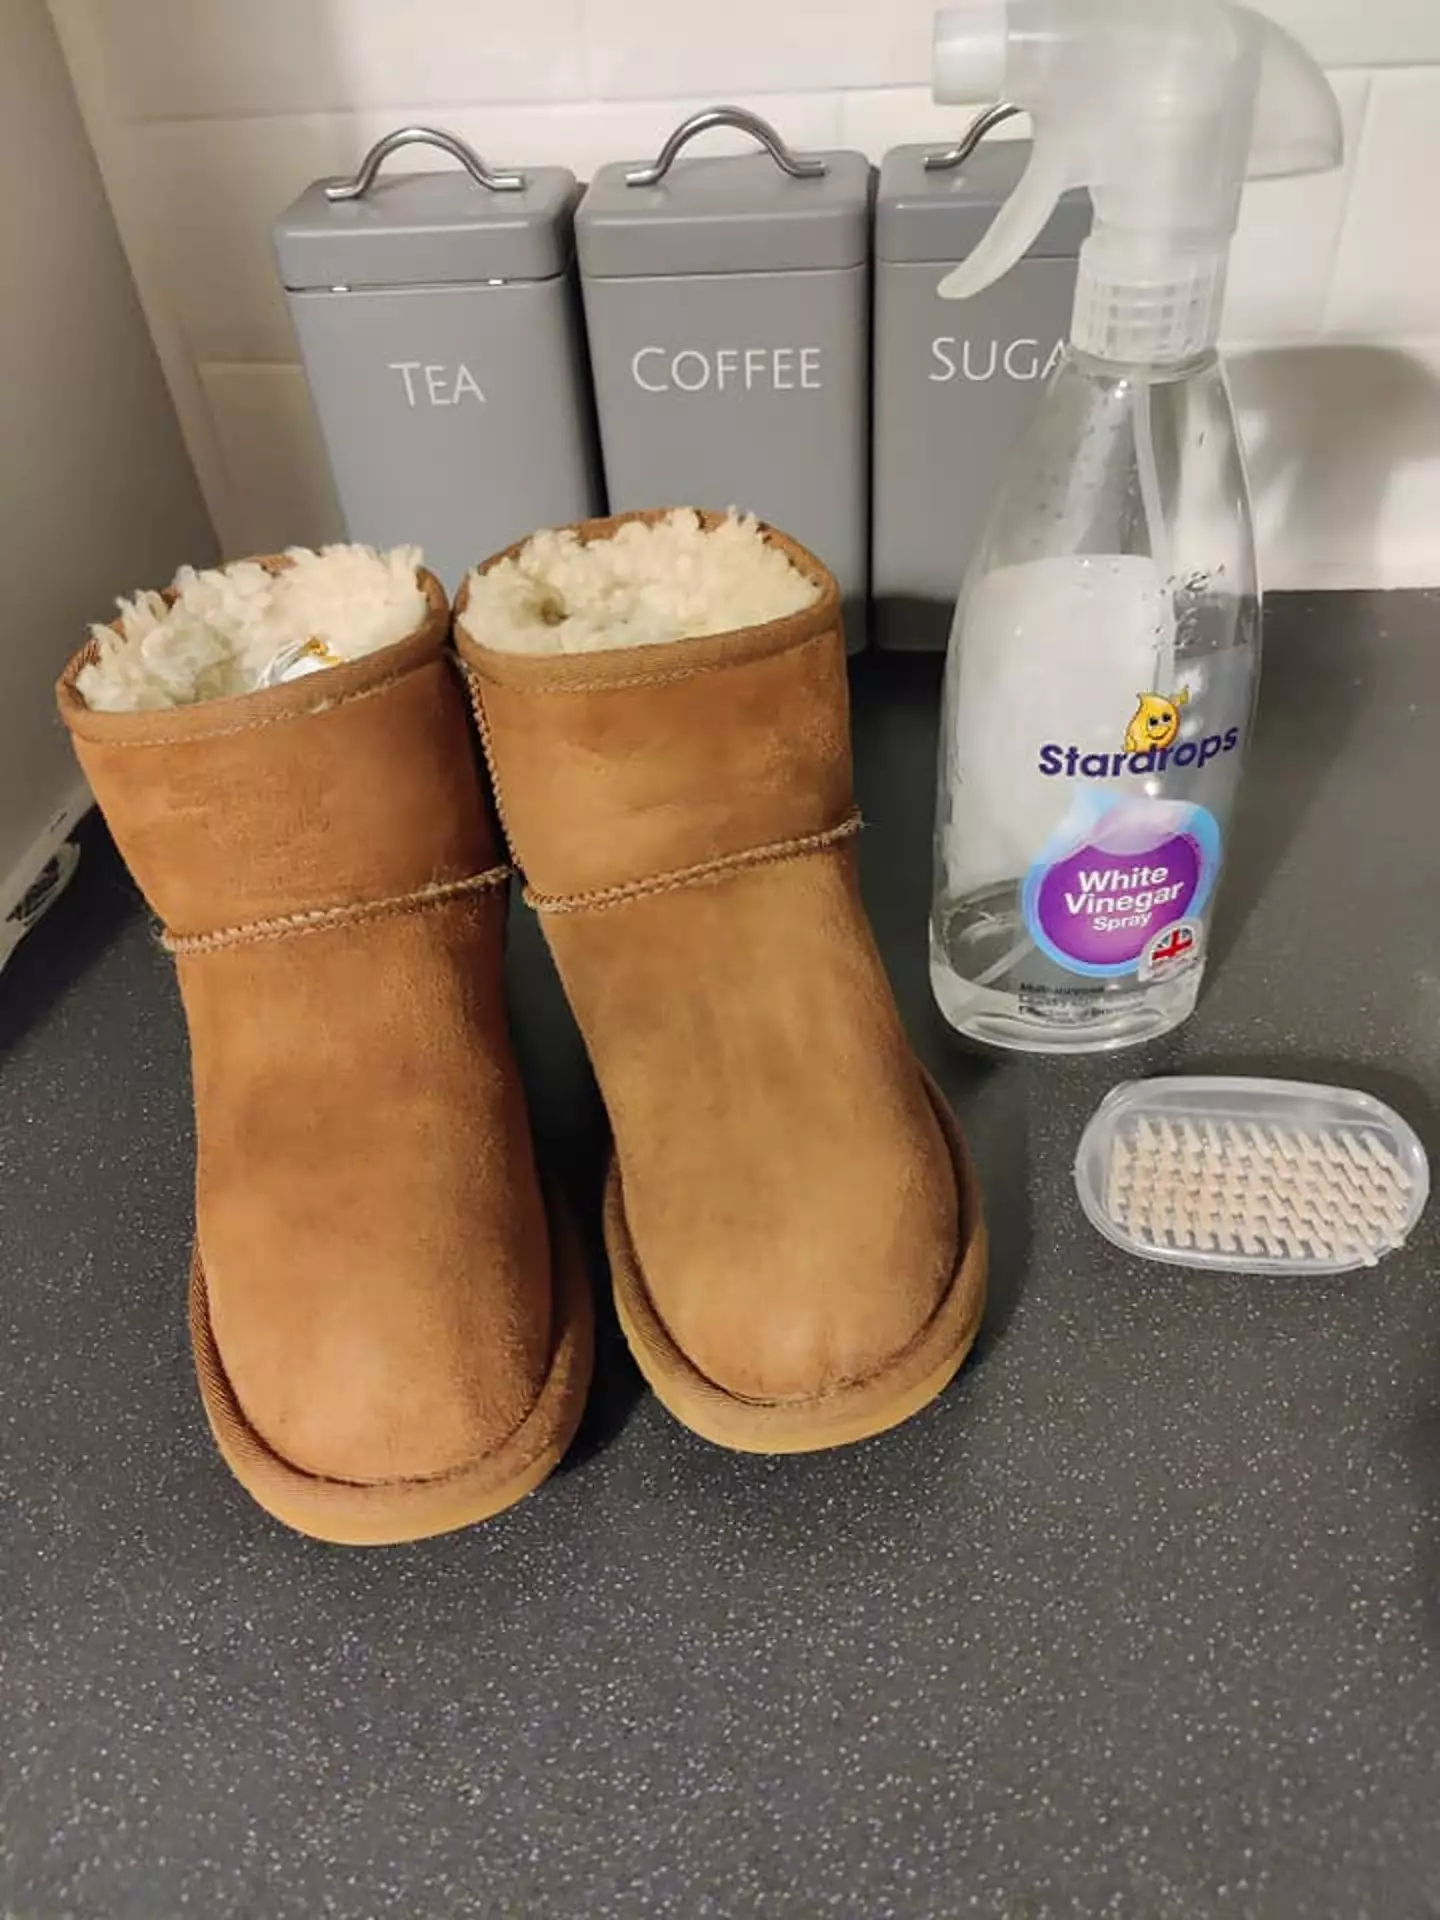 One woman took to Facebook to share her incredible Ugg boot cleaning hack.